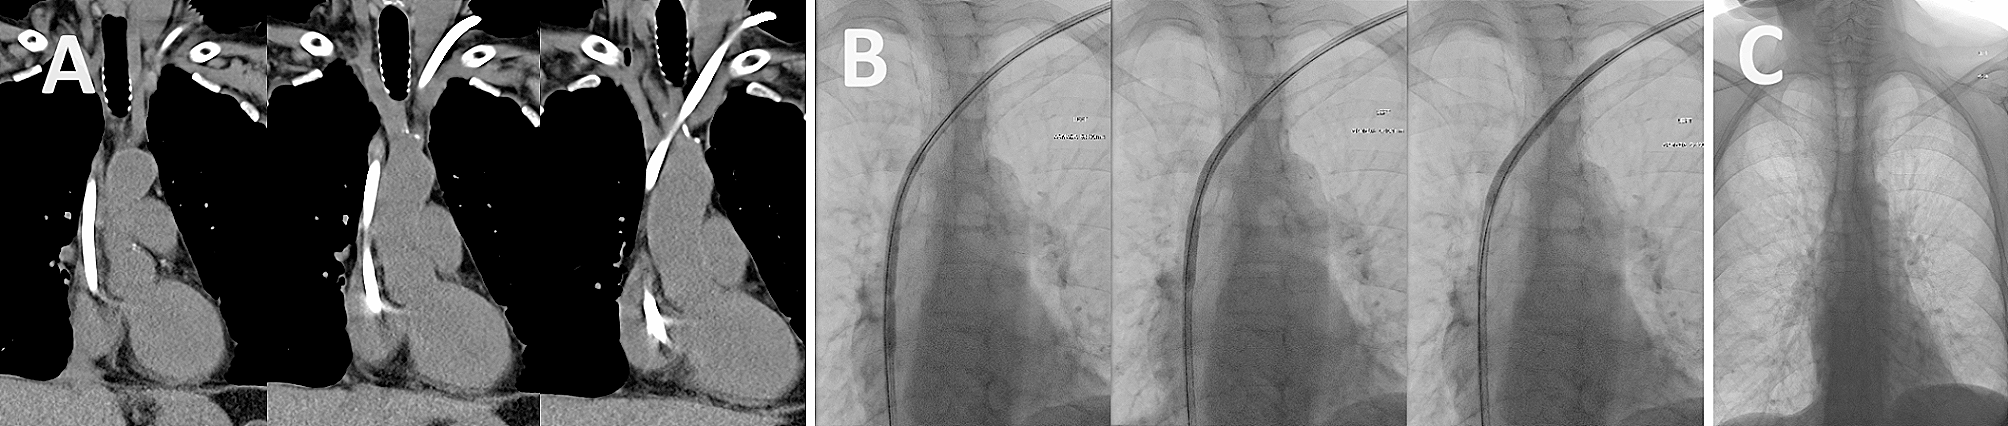 The stuck haemodialysis catheter—a case report of a rare but dreaded complication following kidney transplantation